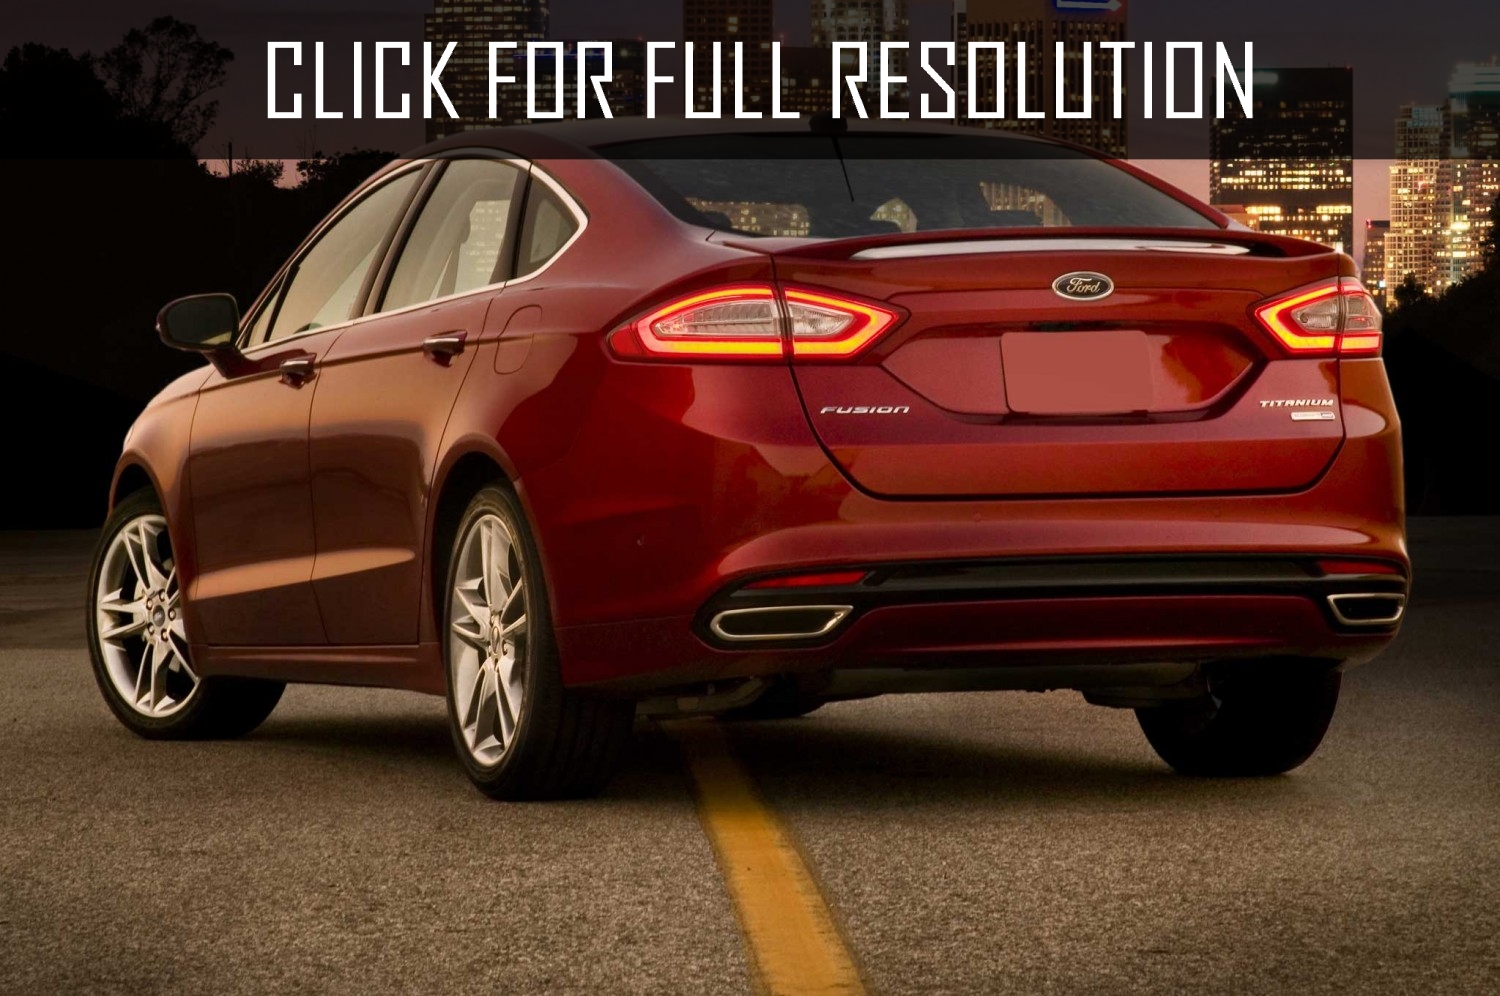 2014 Ford Fusion Ecoboost